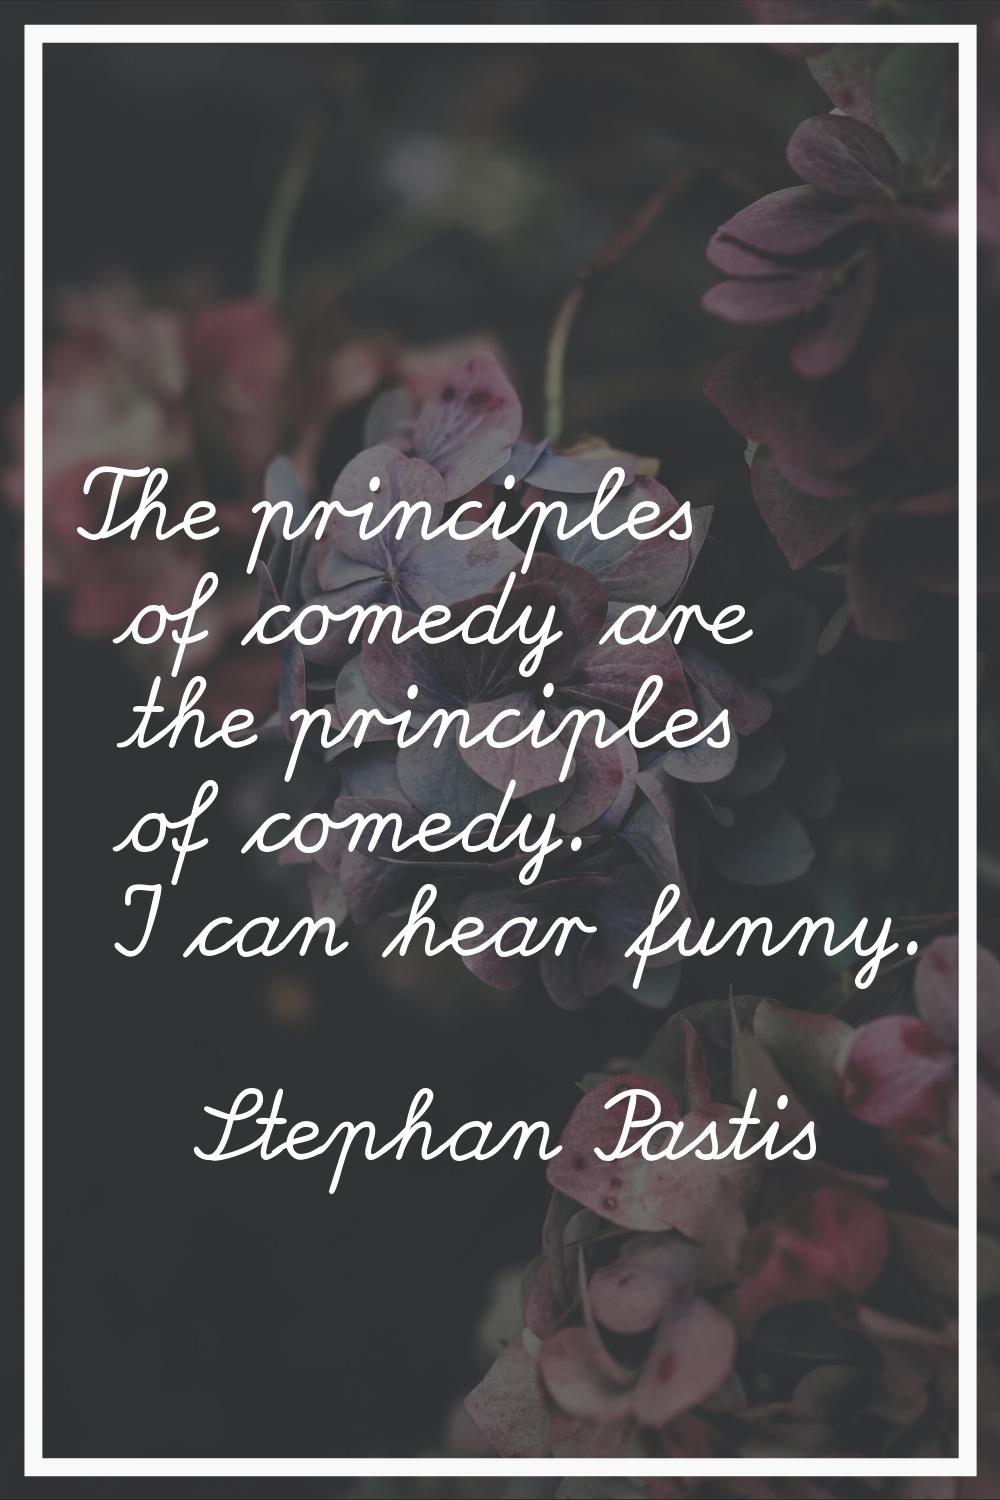 The principles of comedy are the principles of comedy. I can hear funny.